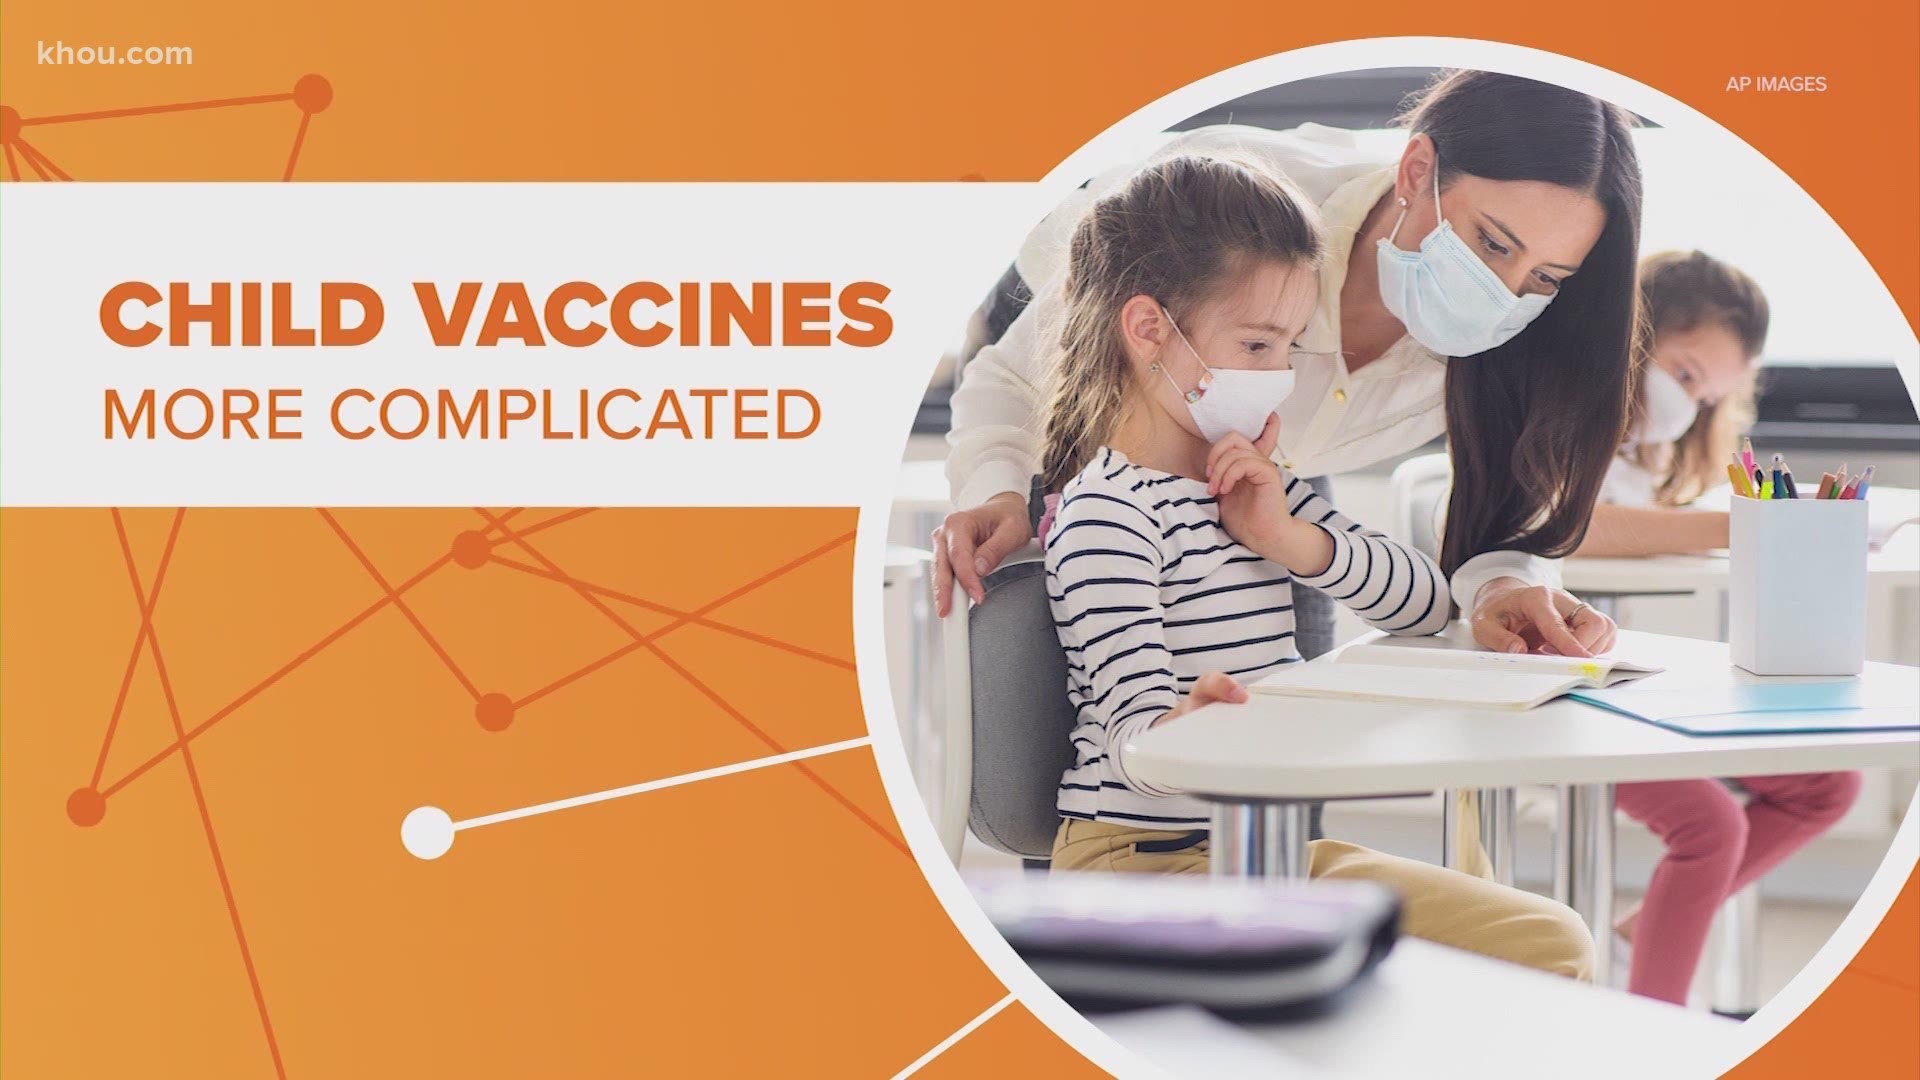 Some experts predict a vaccine for children won’t be ready until fall 2021. Let's connect the dots.